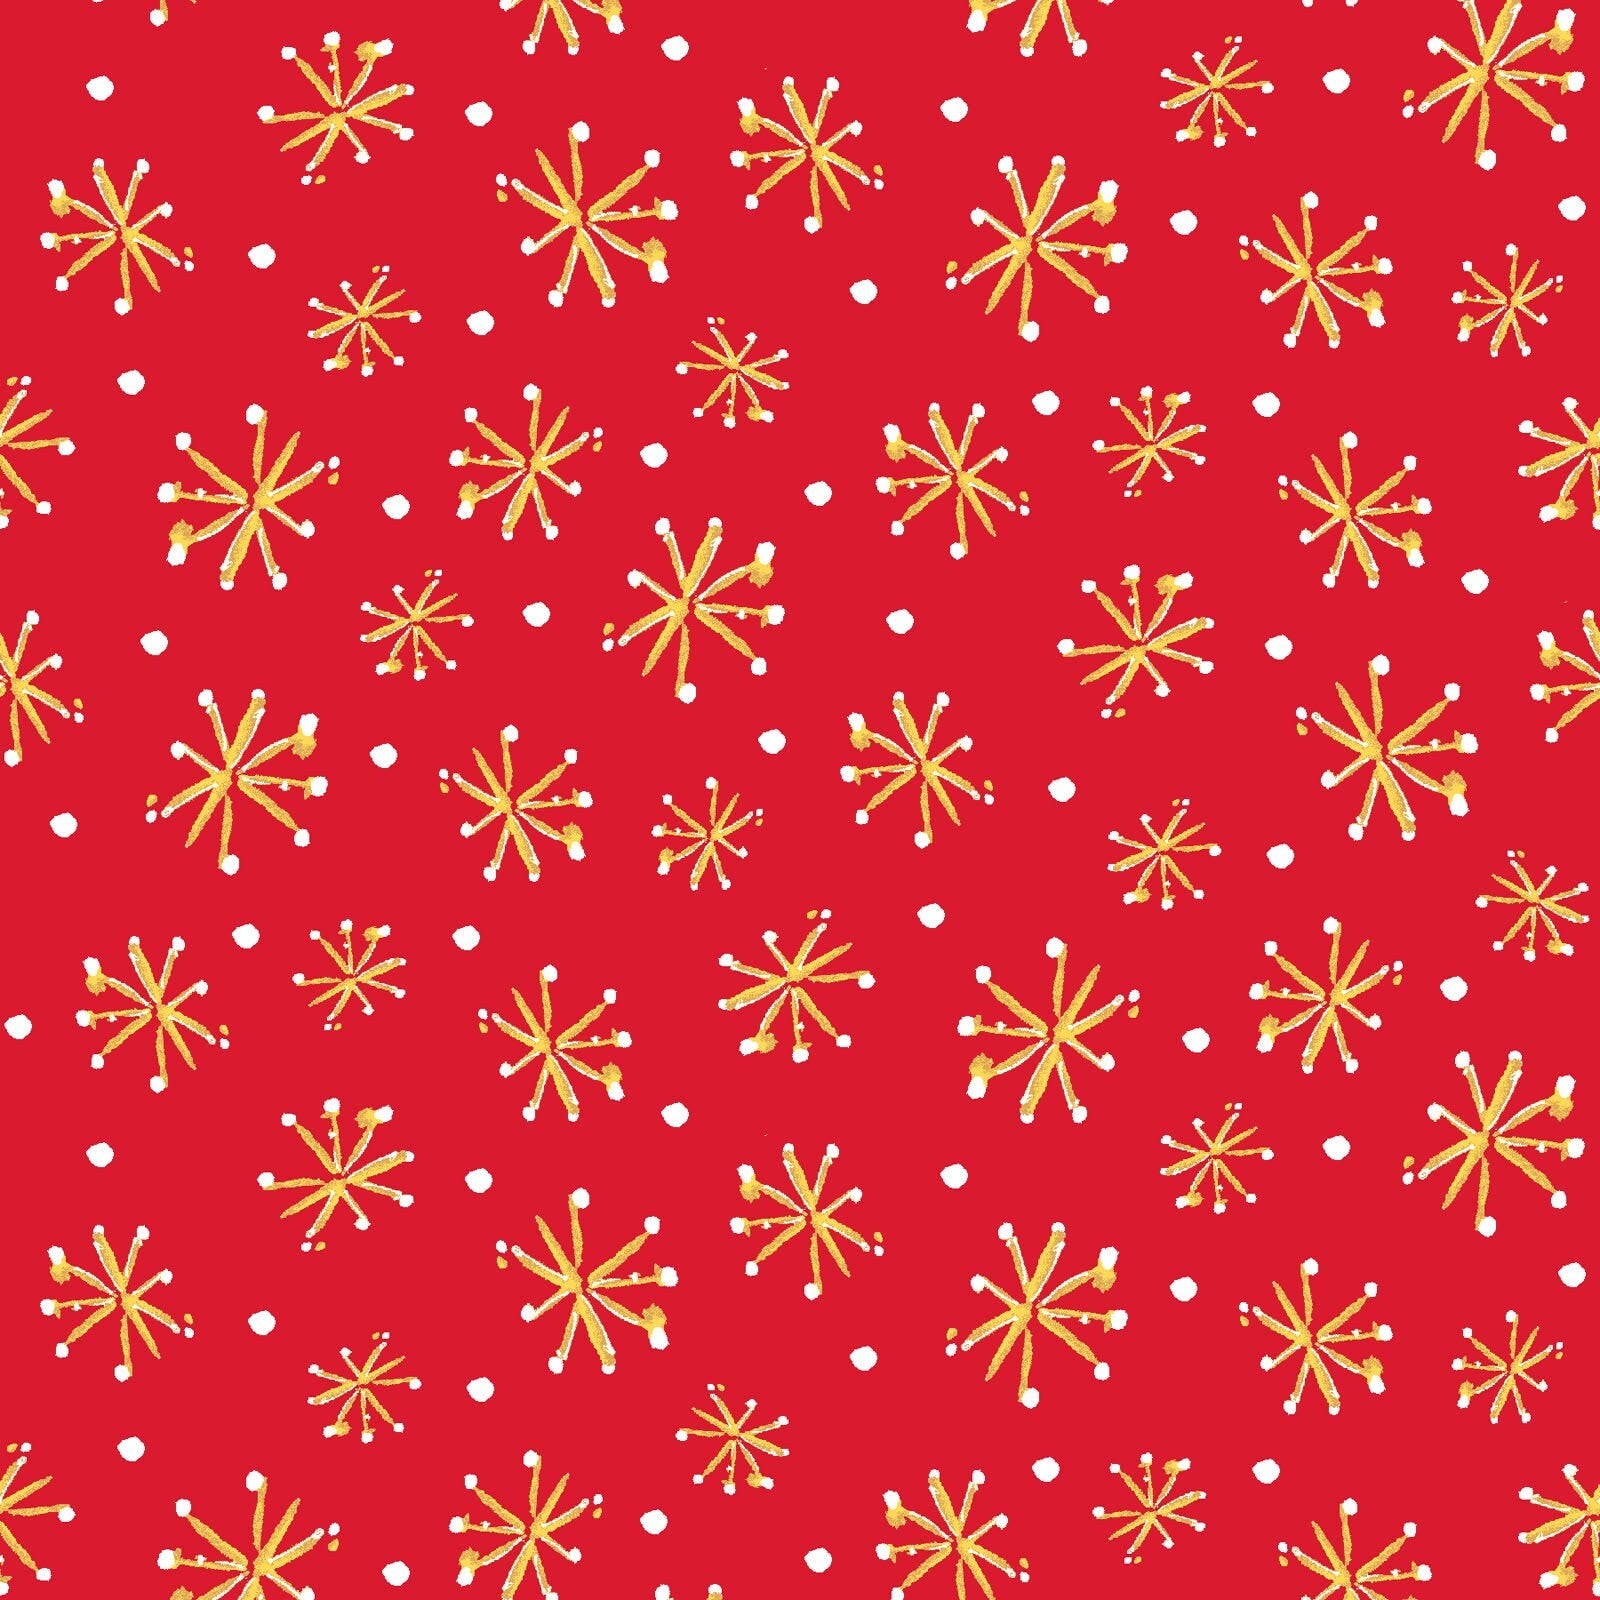 LAST CALL North Star Table Runner Place Mats Quilt Kit, Maywood Studio KIT-MasNOS, All the Trimmings Christmas Xmas Table Quilts Kit